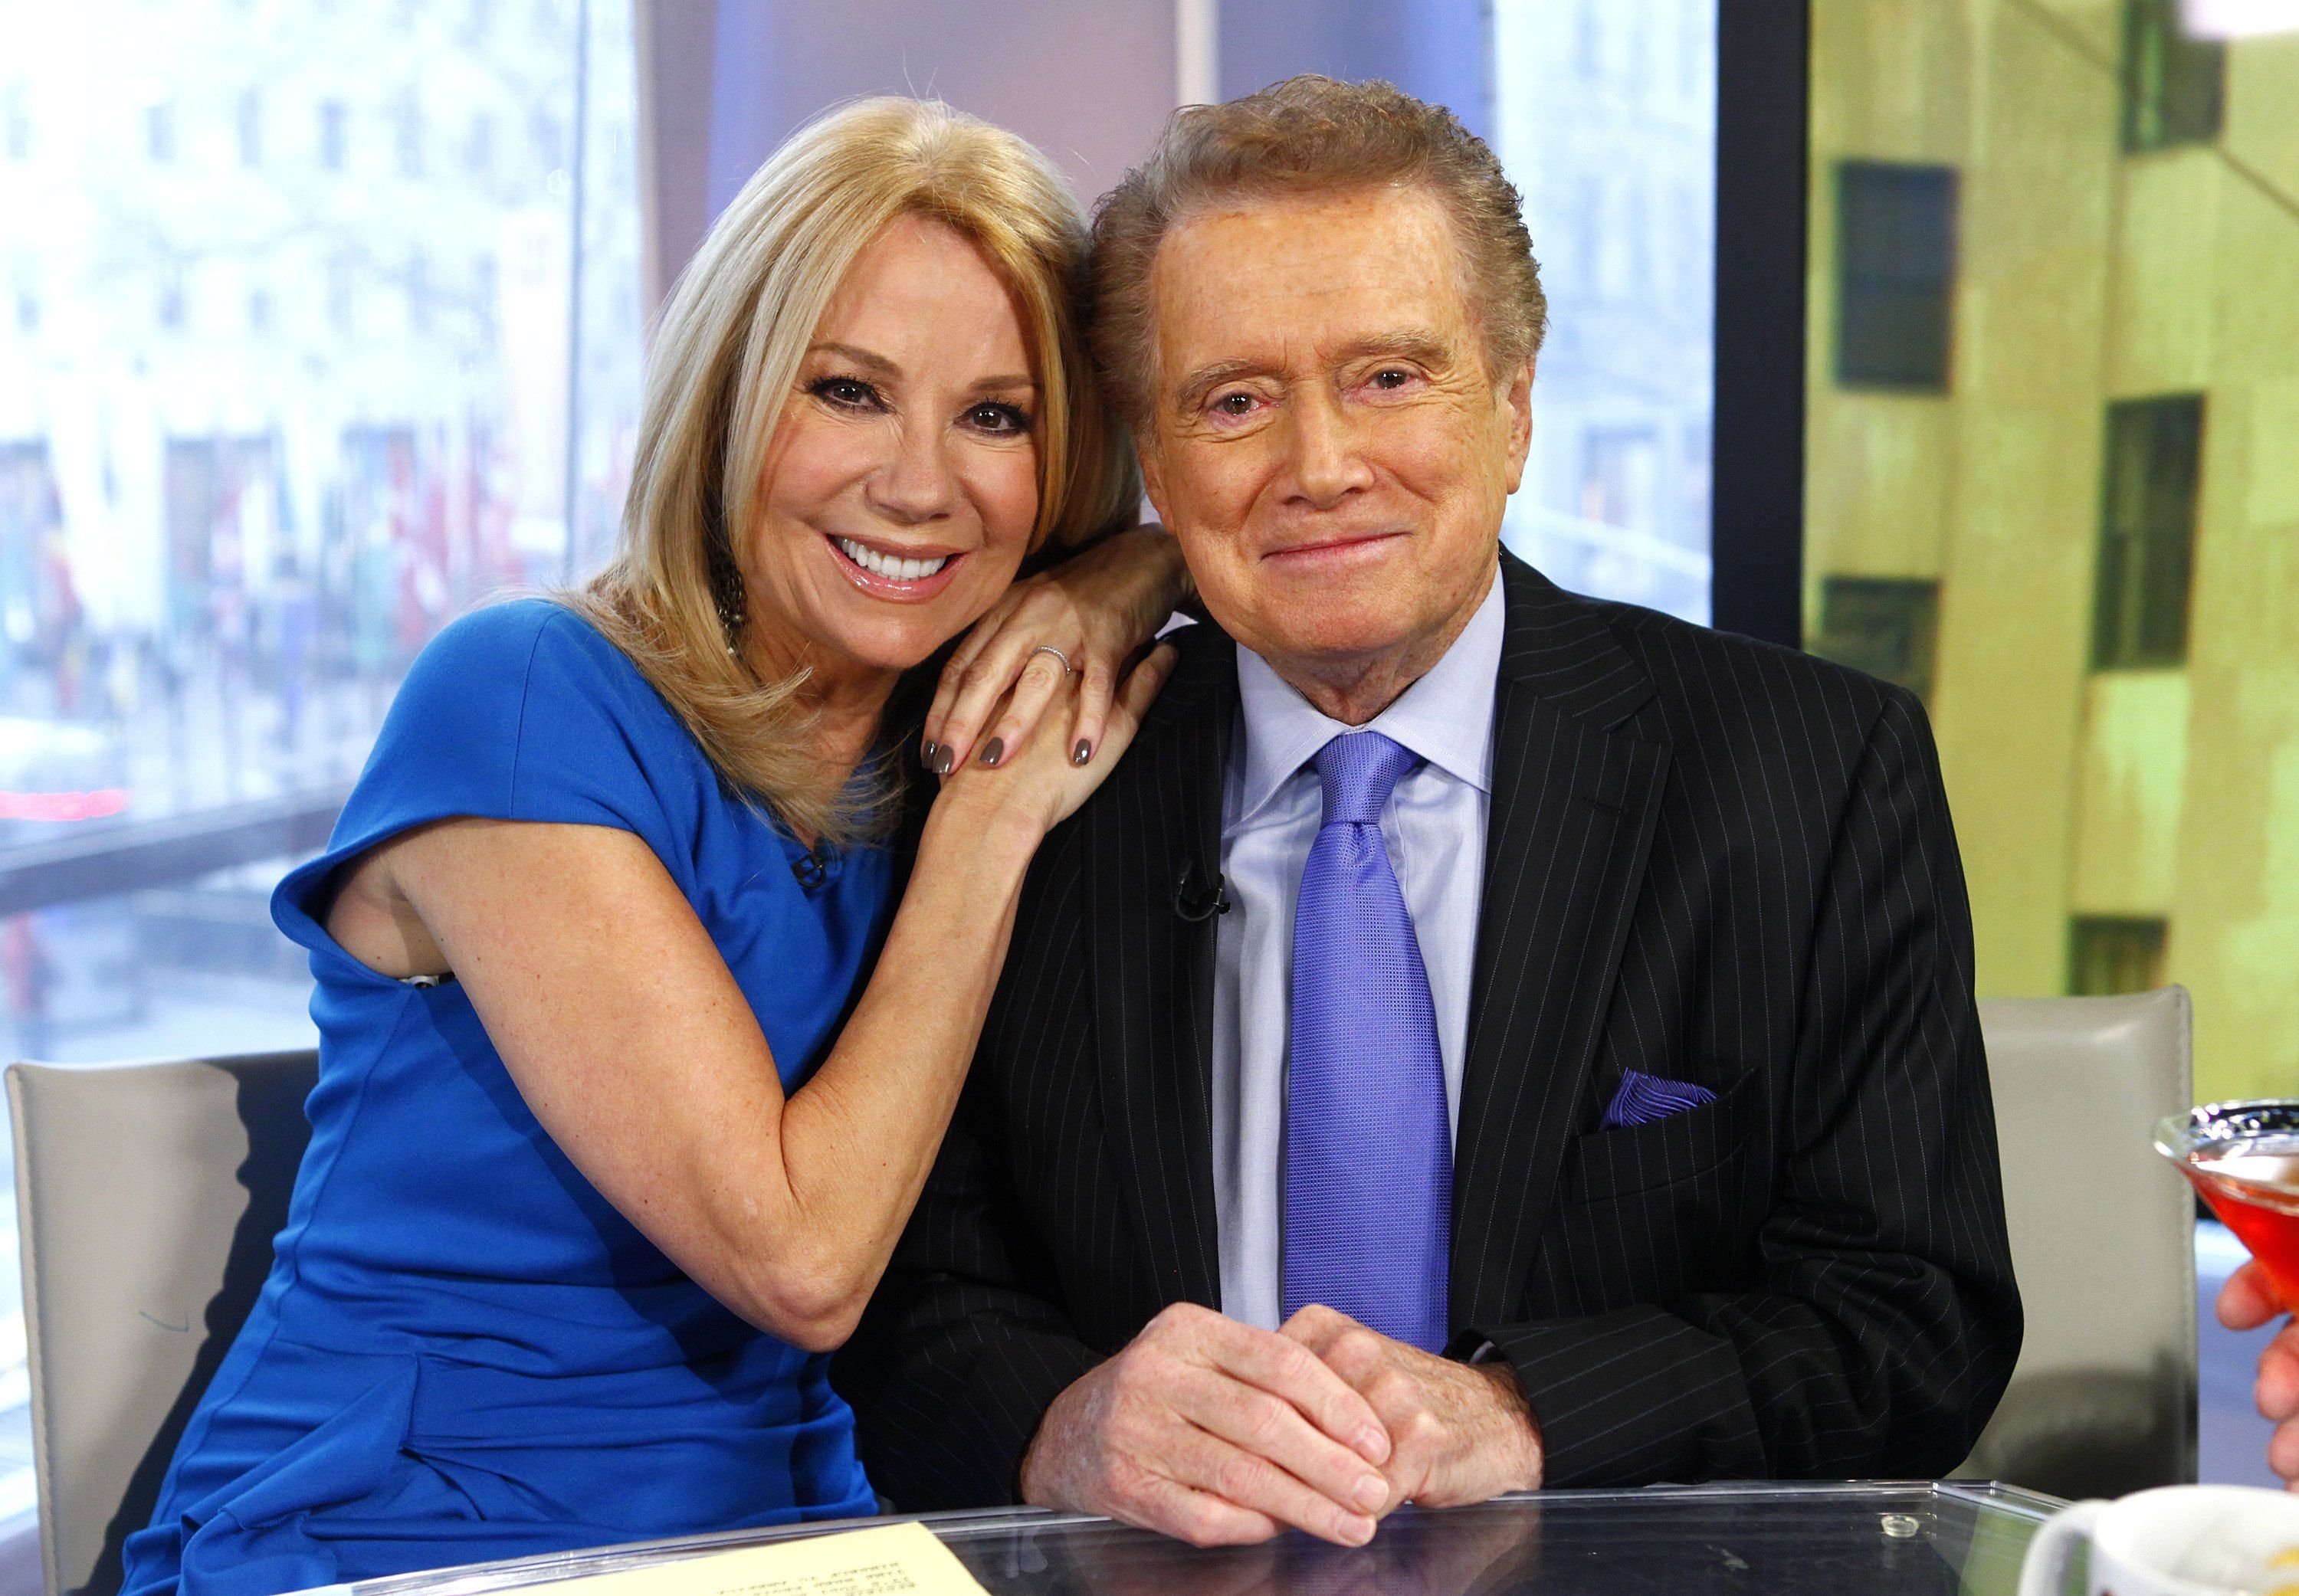 Kathie Lee Gifford and Regis Philbin on NBC News' "Today" show on January 19, 2012. | Source: Peter Kramer/NBC/NBC NewsWire/Getty Images